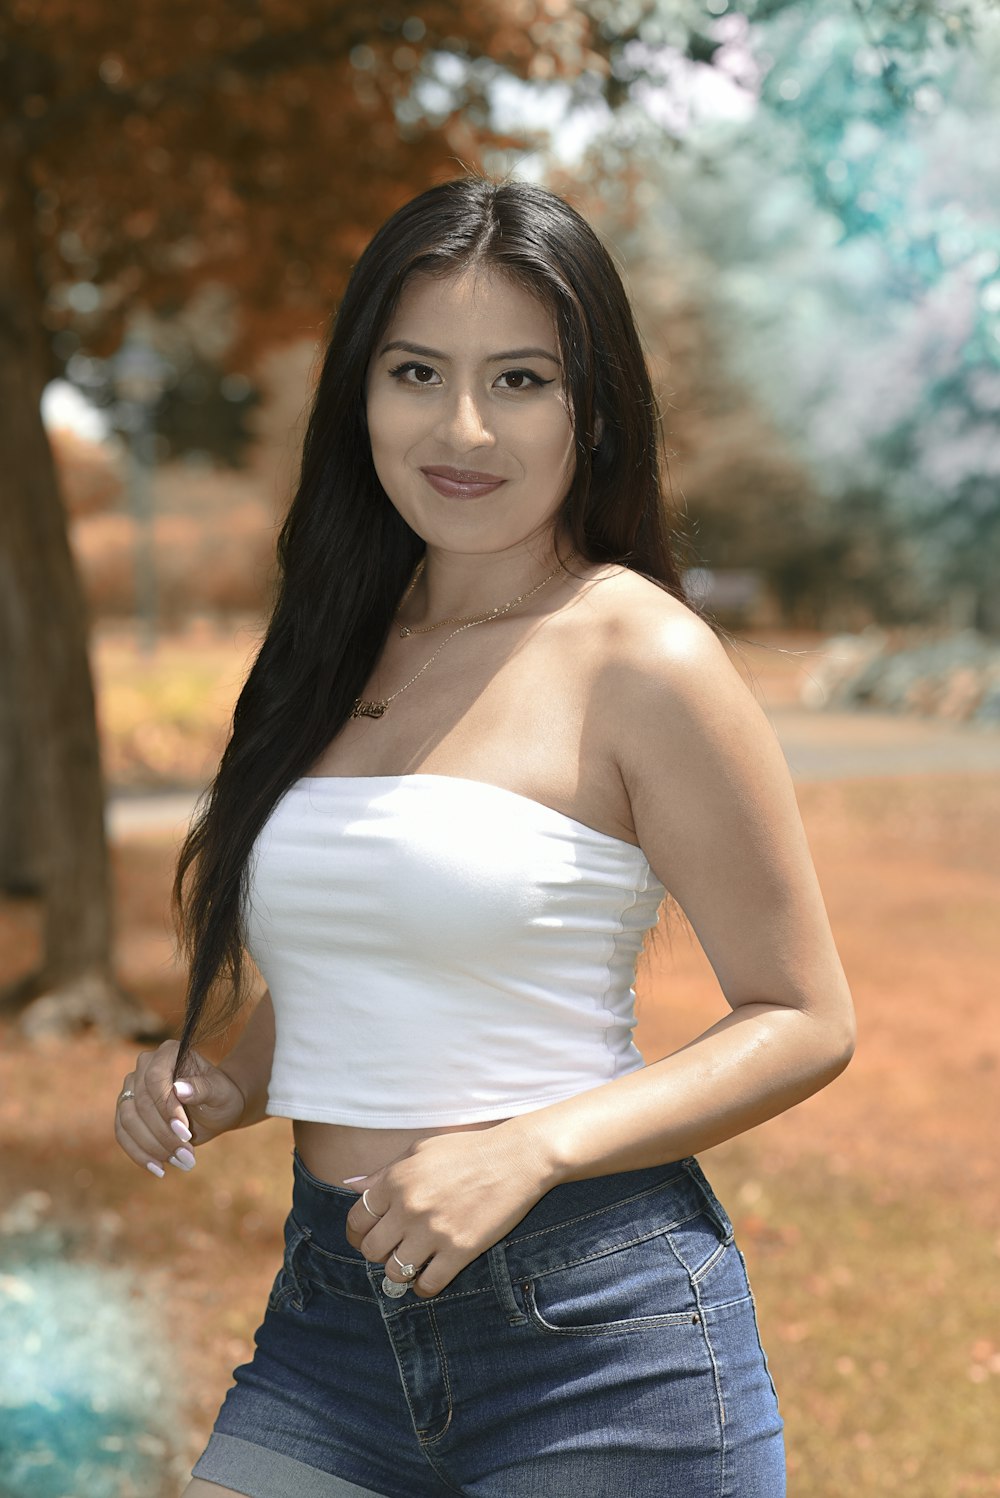 a woman in a white top posing for a picture